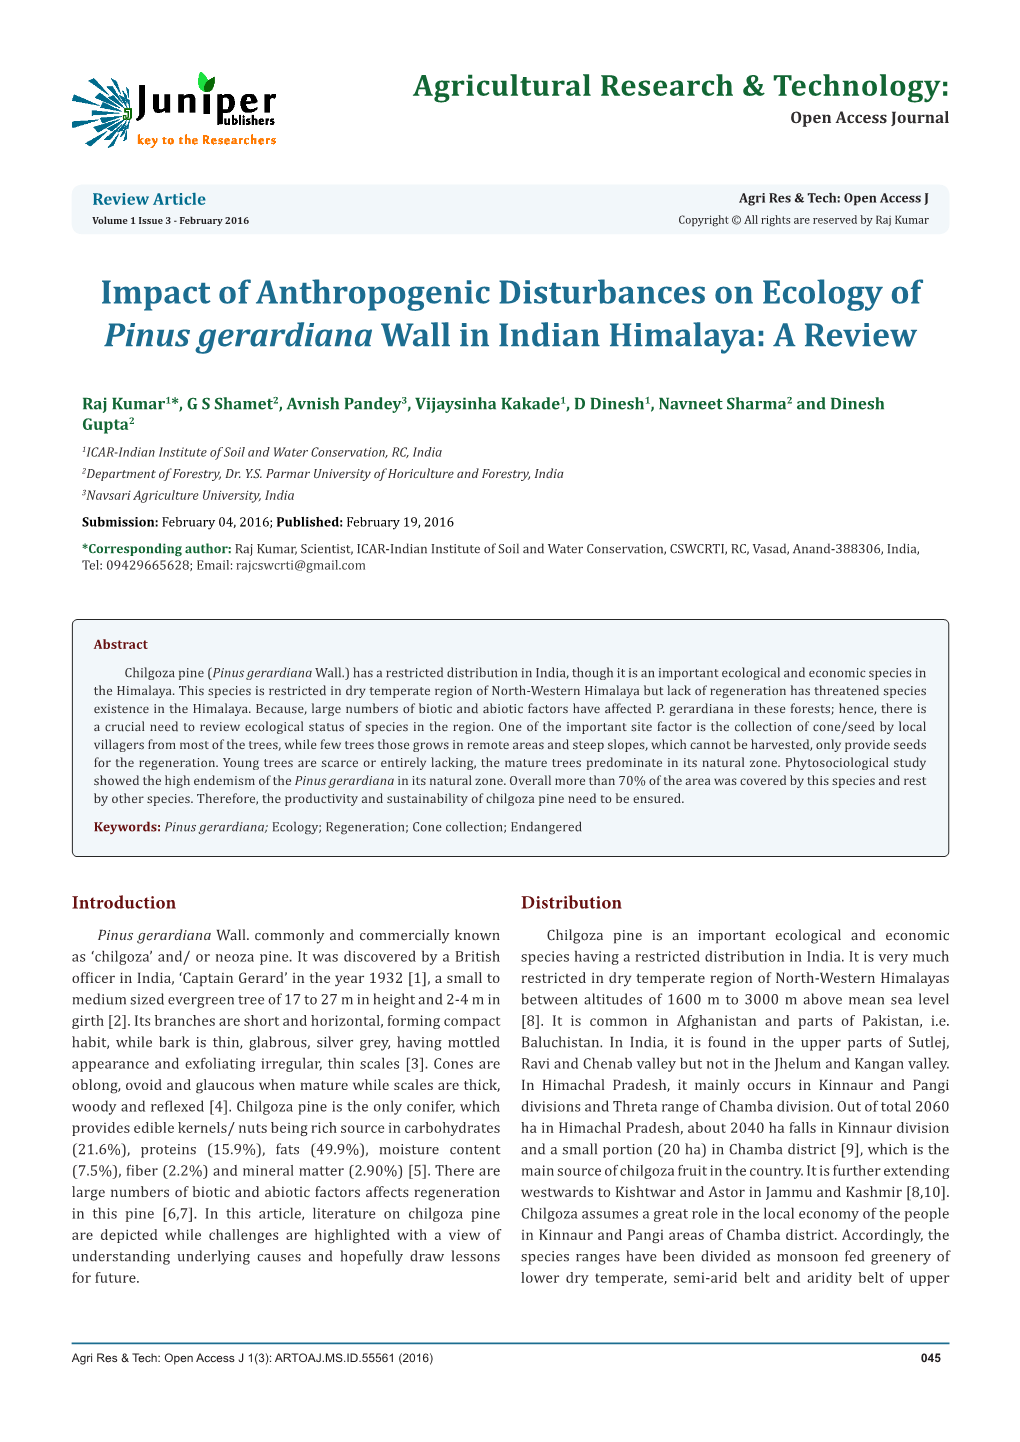 Impact of Anthropogenic Disturbances on Ecology of Pinus Gerardiana Wall in Indian Himalaya: a Review